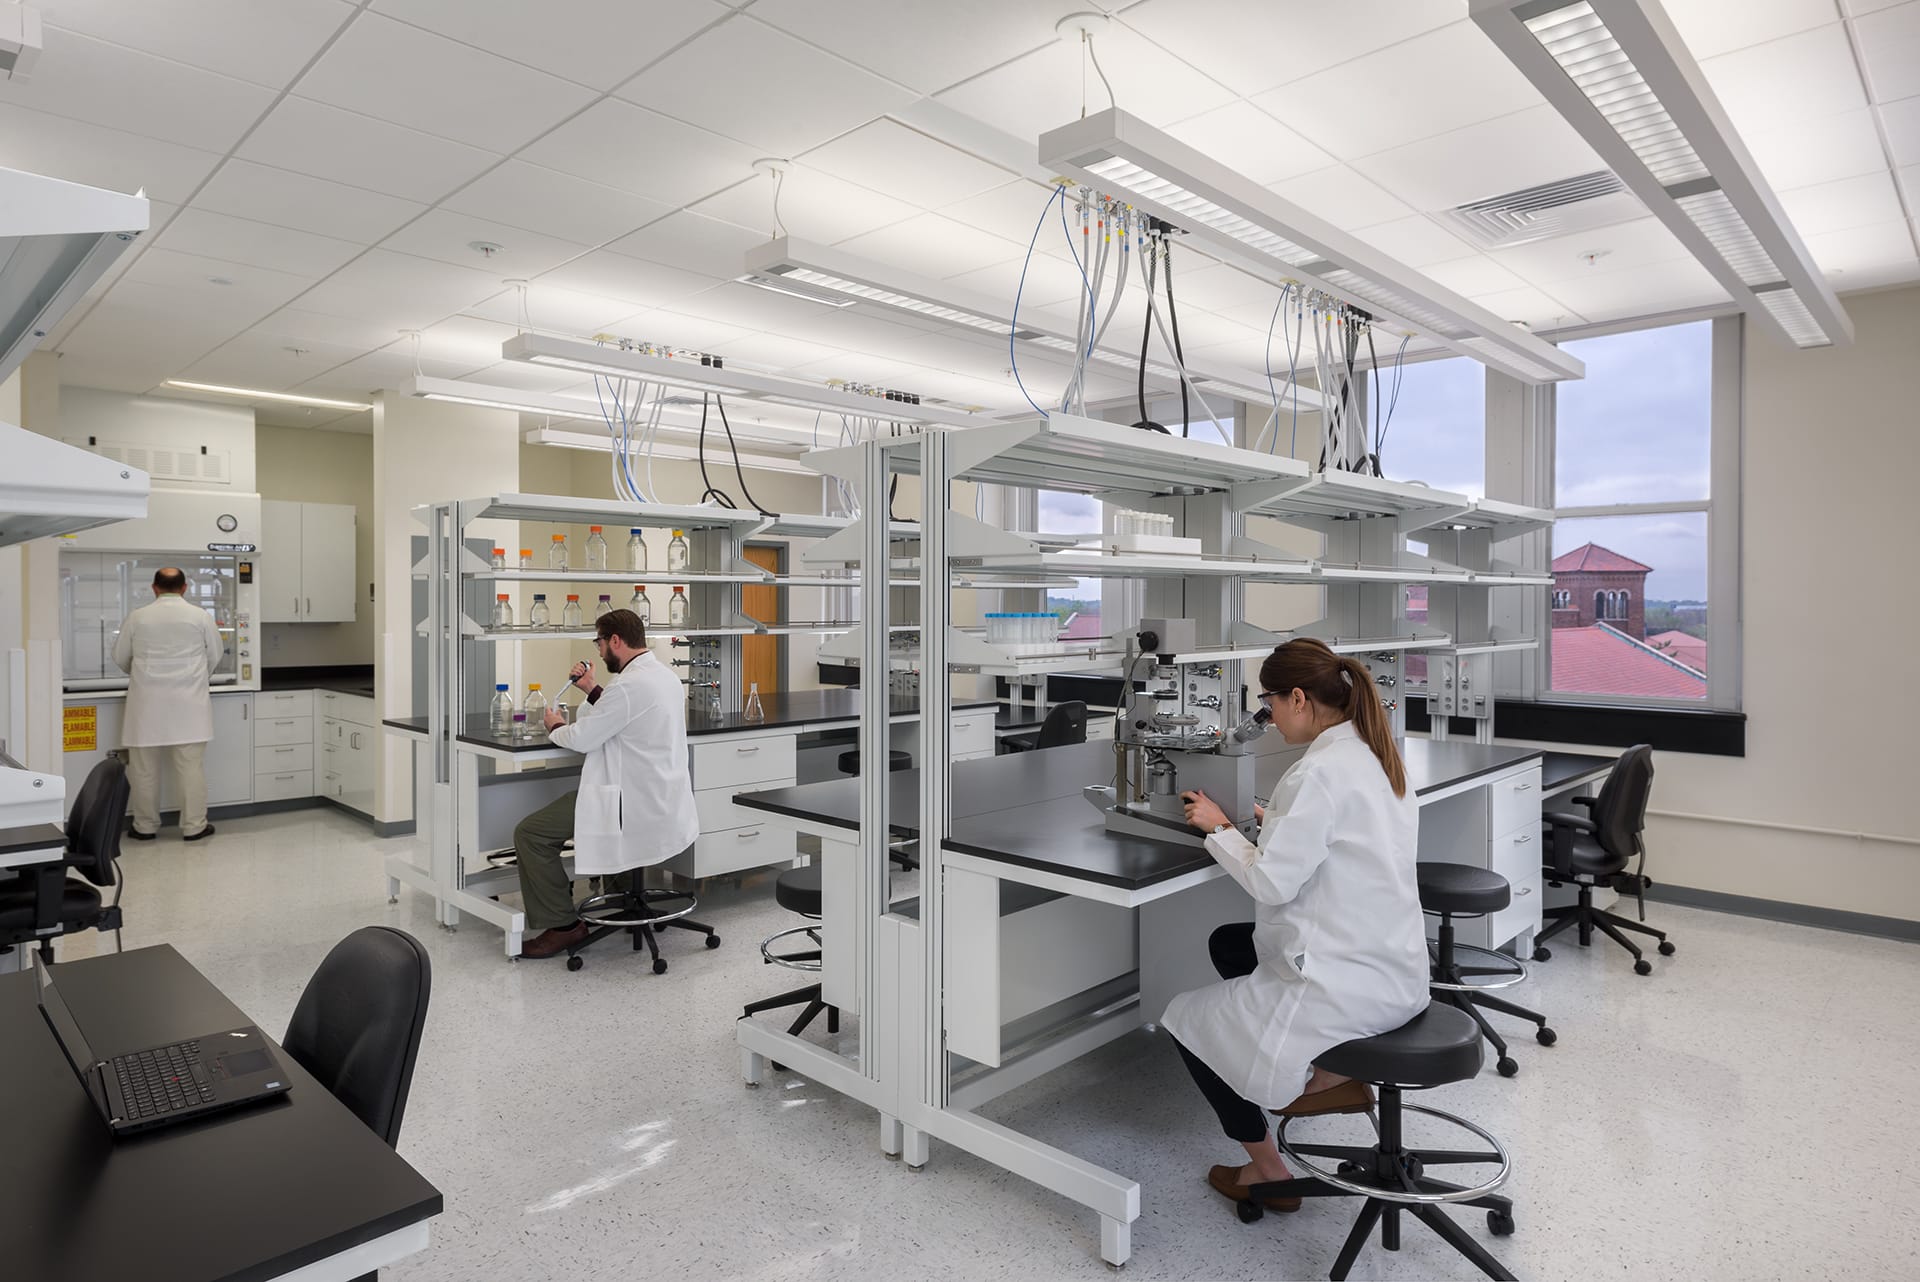 washington university school of medicine cell biology lab designed by trivers architectural firm